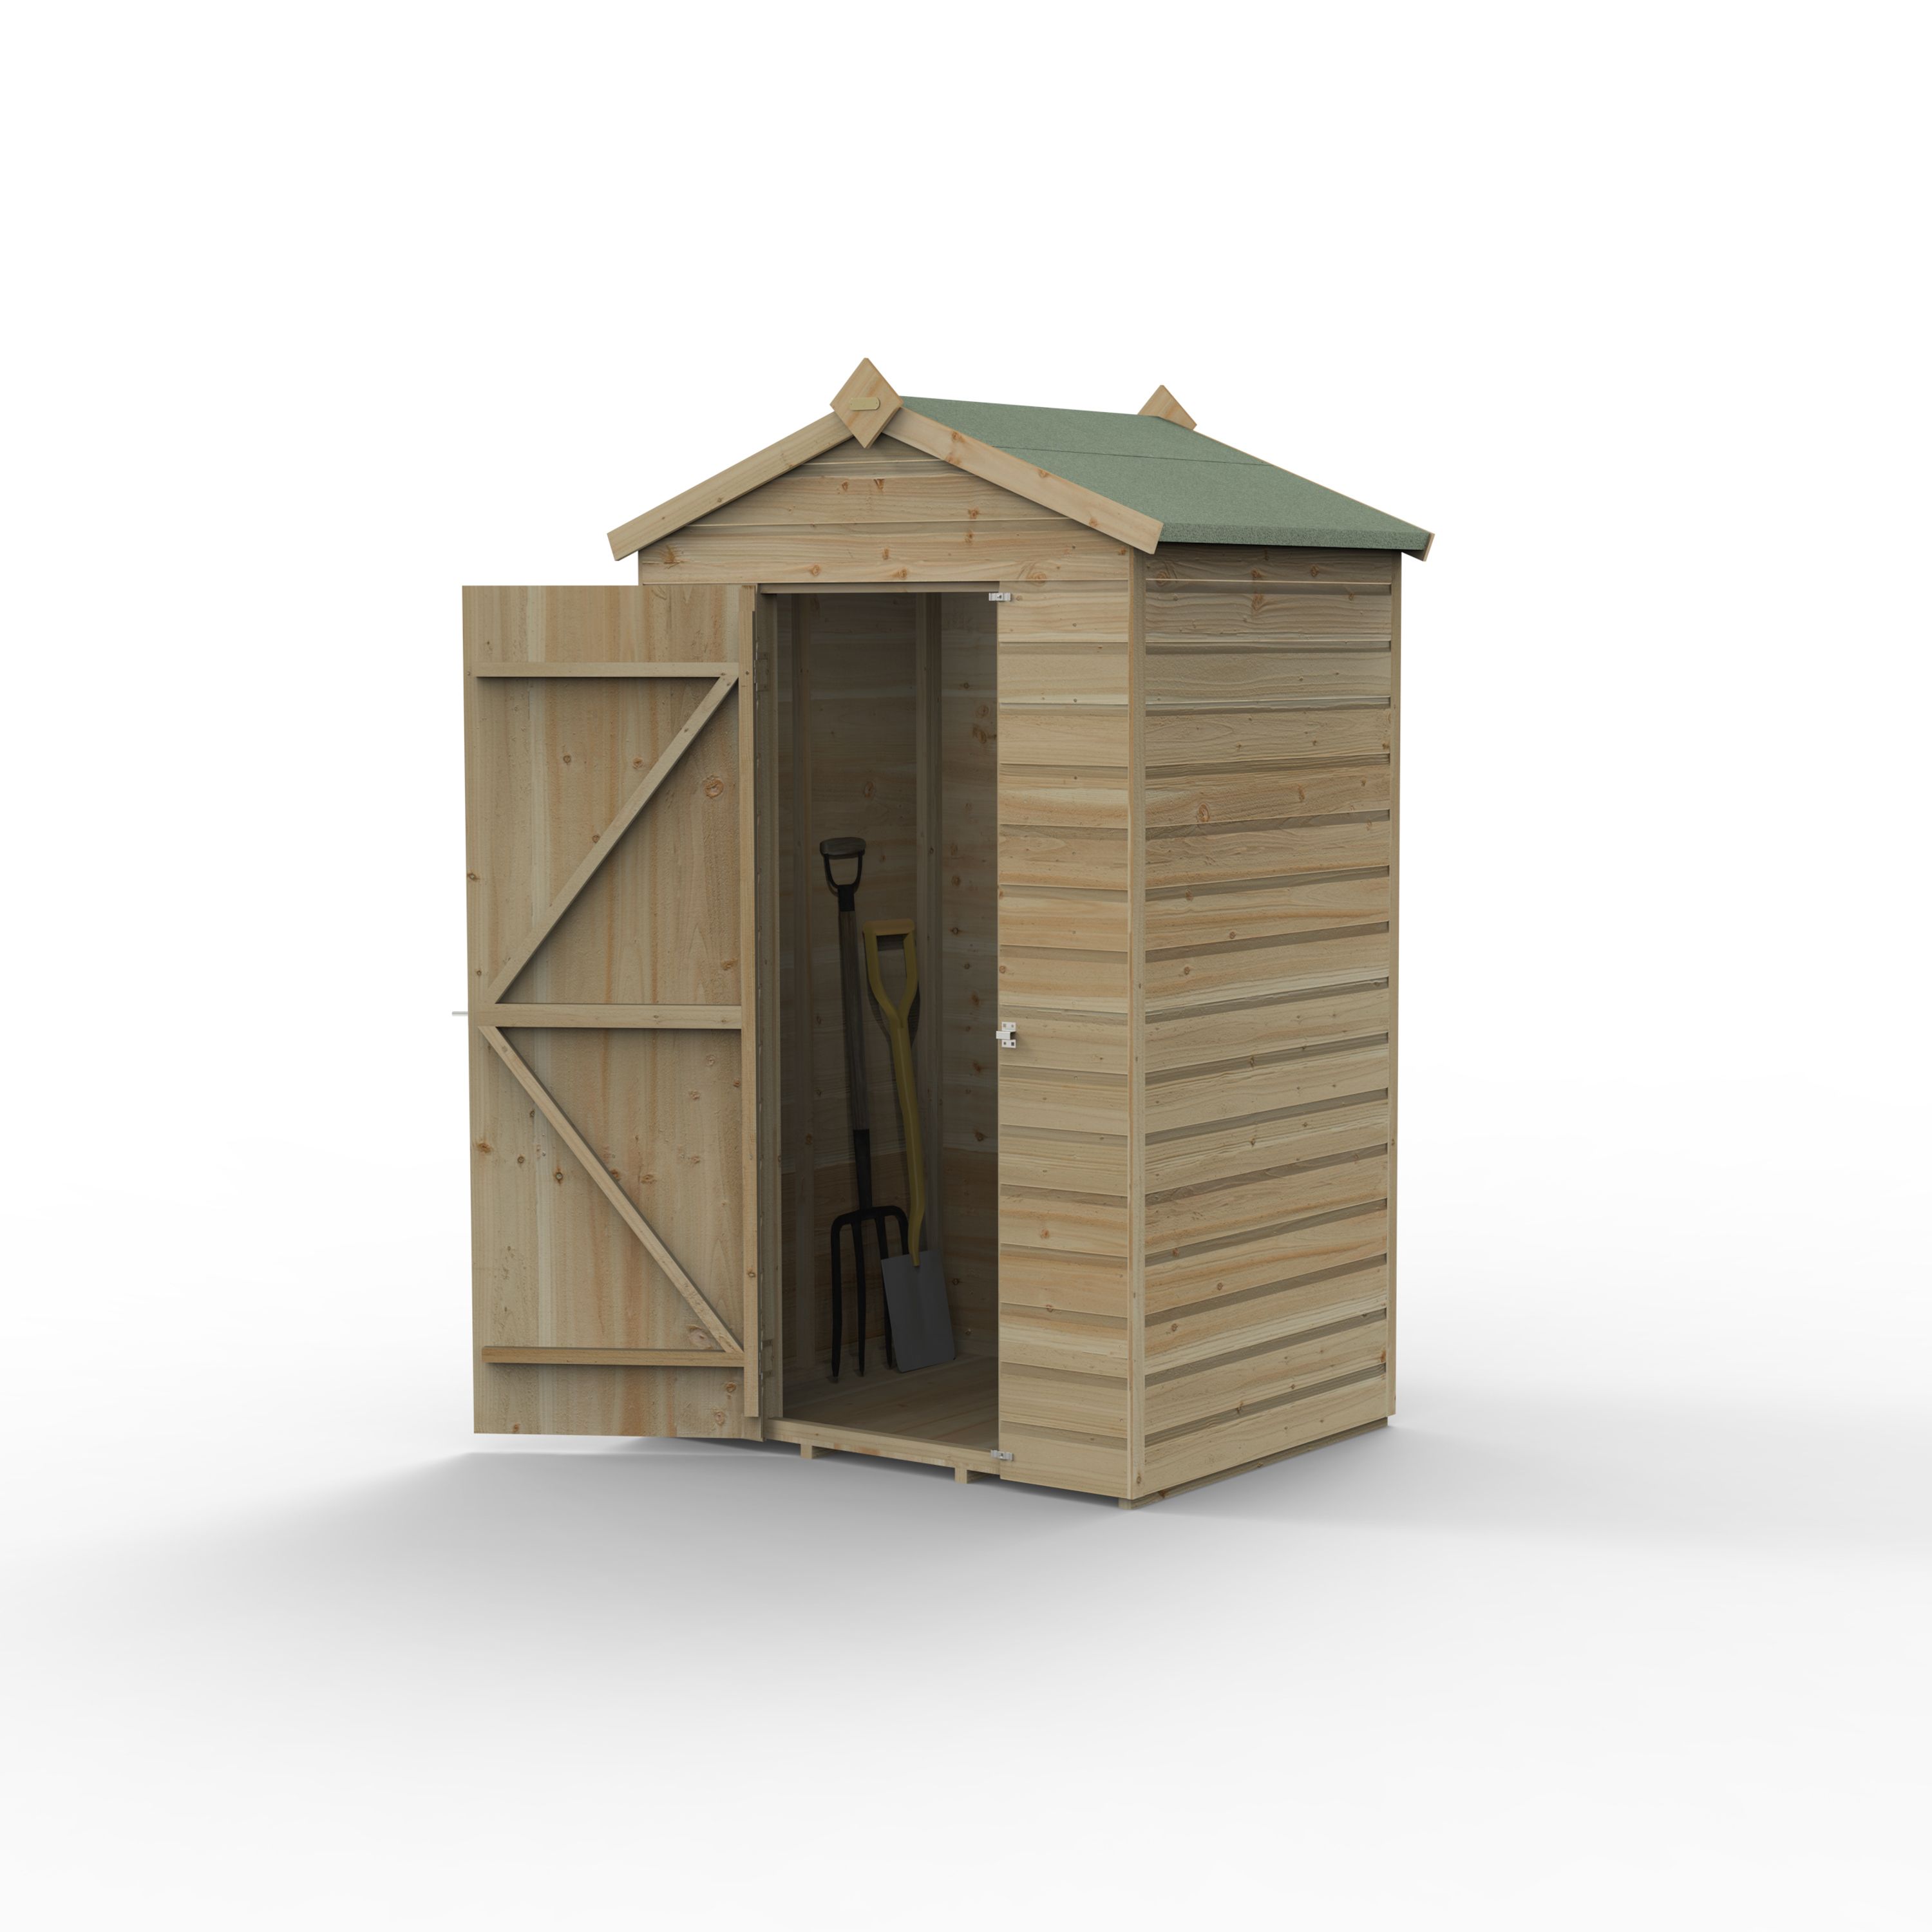 Forest Garden Beckwood 4x3 ft Apex Natural timber Wooden Shed with floor - Assembly not required